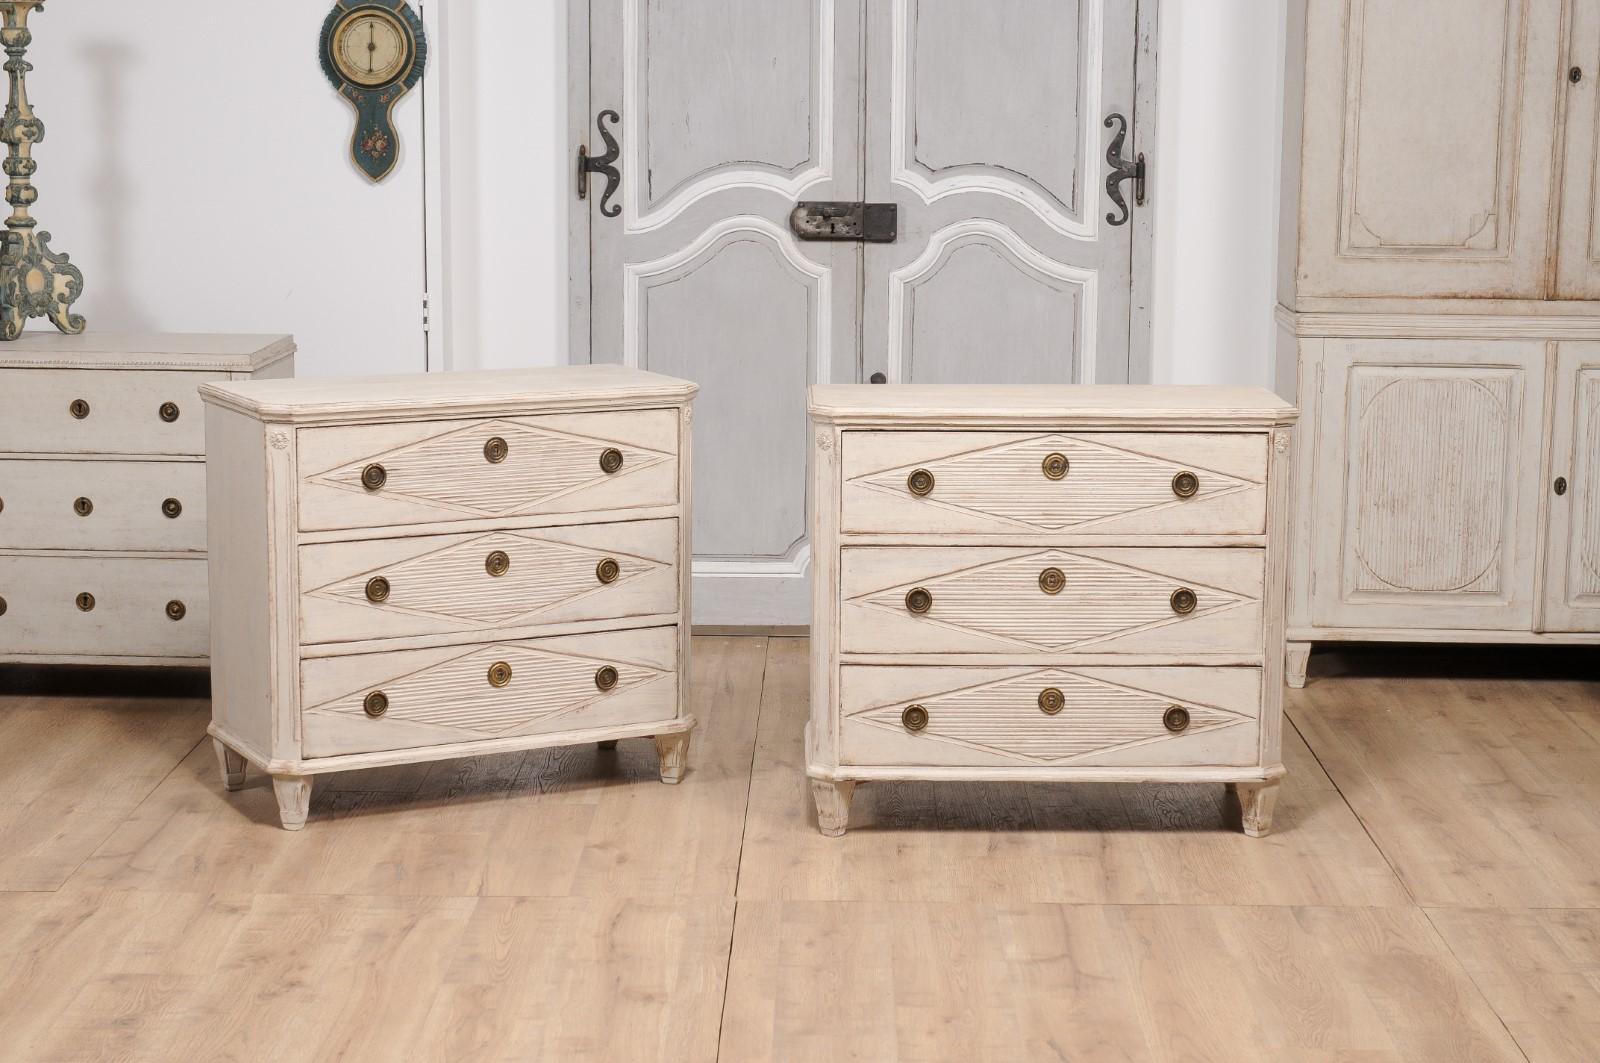 Swedish Gustavian Style 19th Century Painted Chests with Carved Diamond Motifs, a Pair For Sale